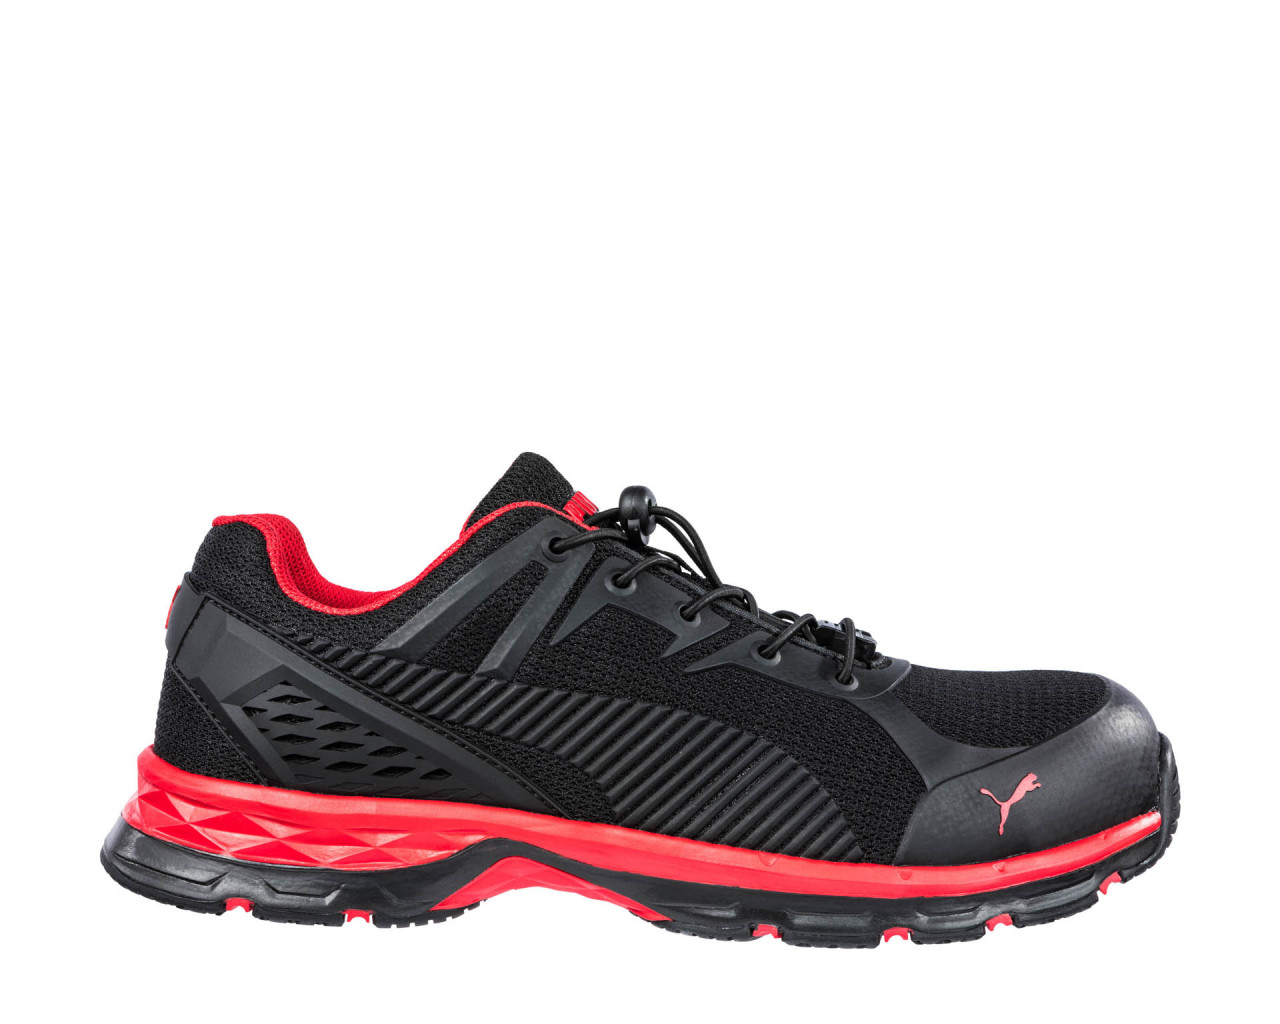 PUMA SAFETY Fuse Motion 2.0 RED LOW S1P 